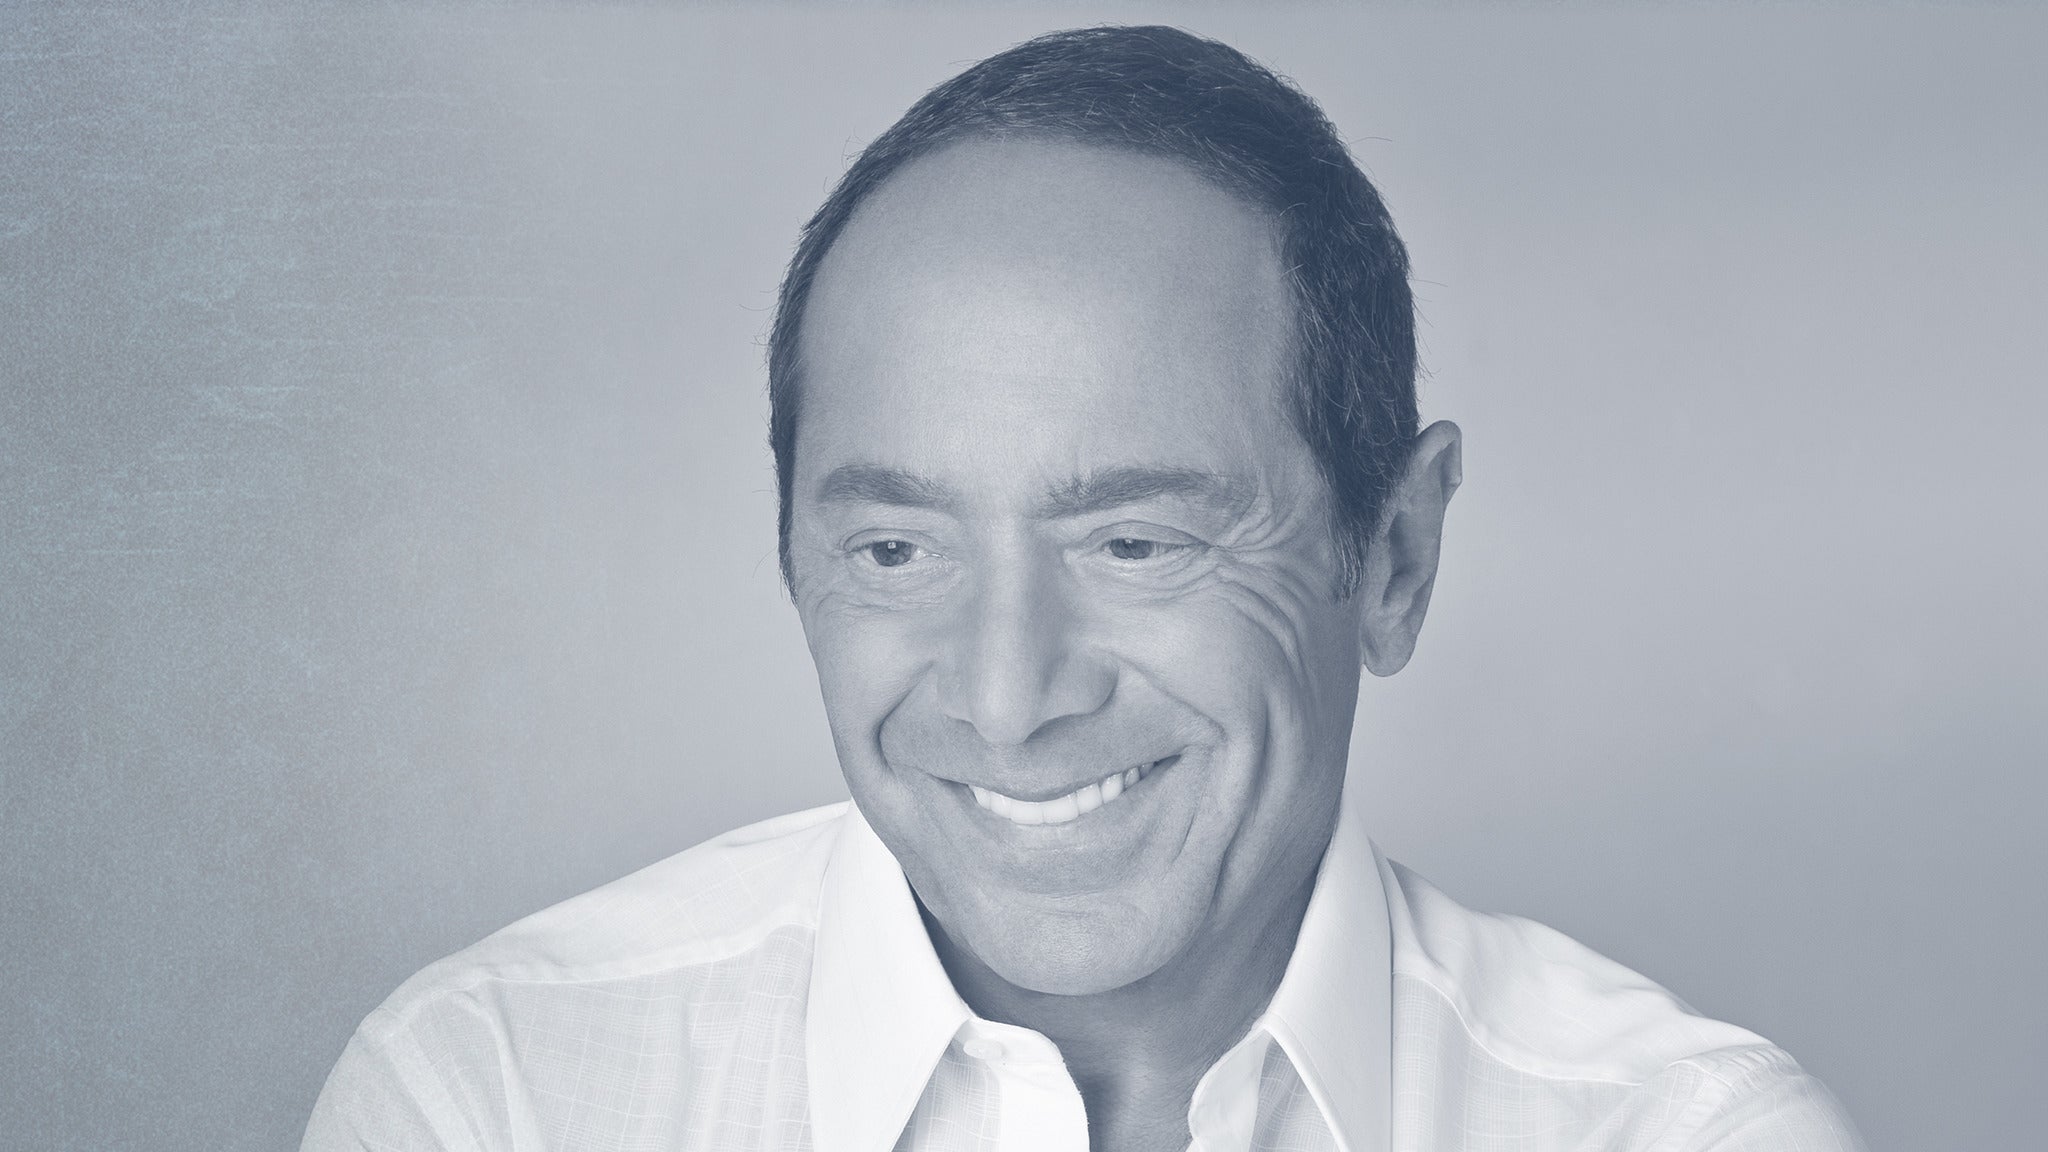 Event details about Paul Anka - Anka Sings Sinatra: His Songs, My Songs, My...